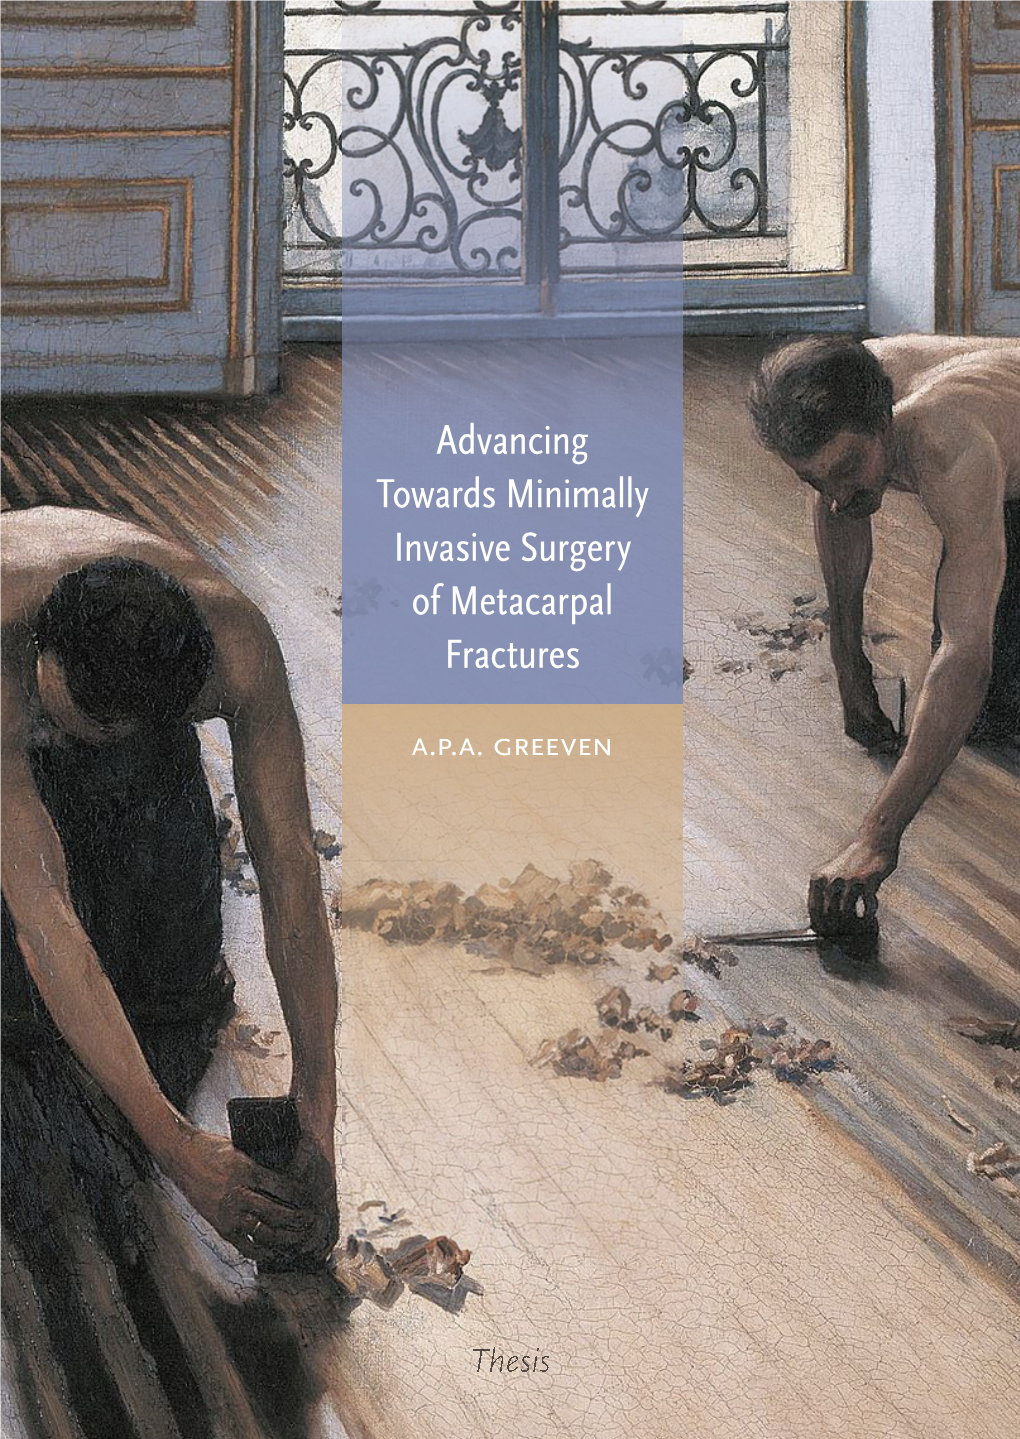 Advancing Towards Minimally Invasive Surgical Treatment of Metacarpal Fractures Alexander P